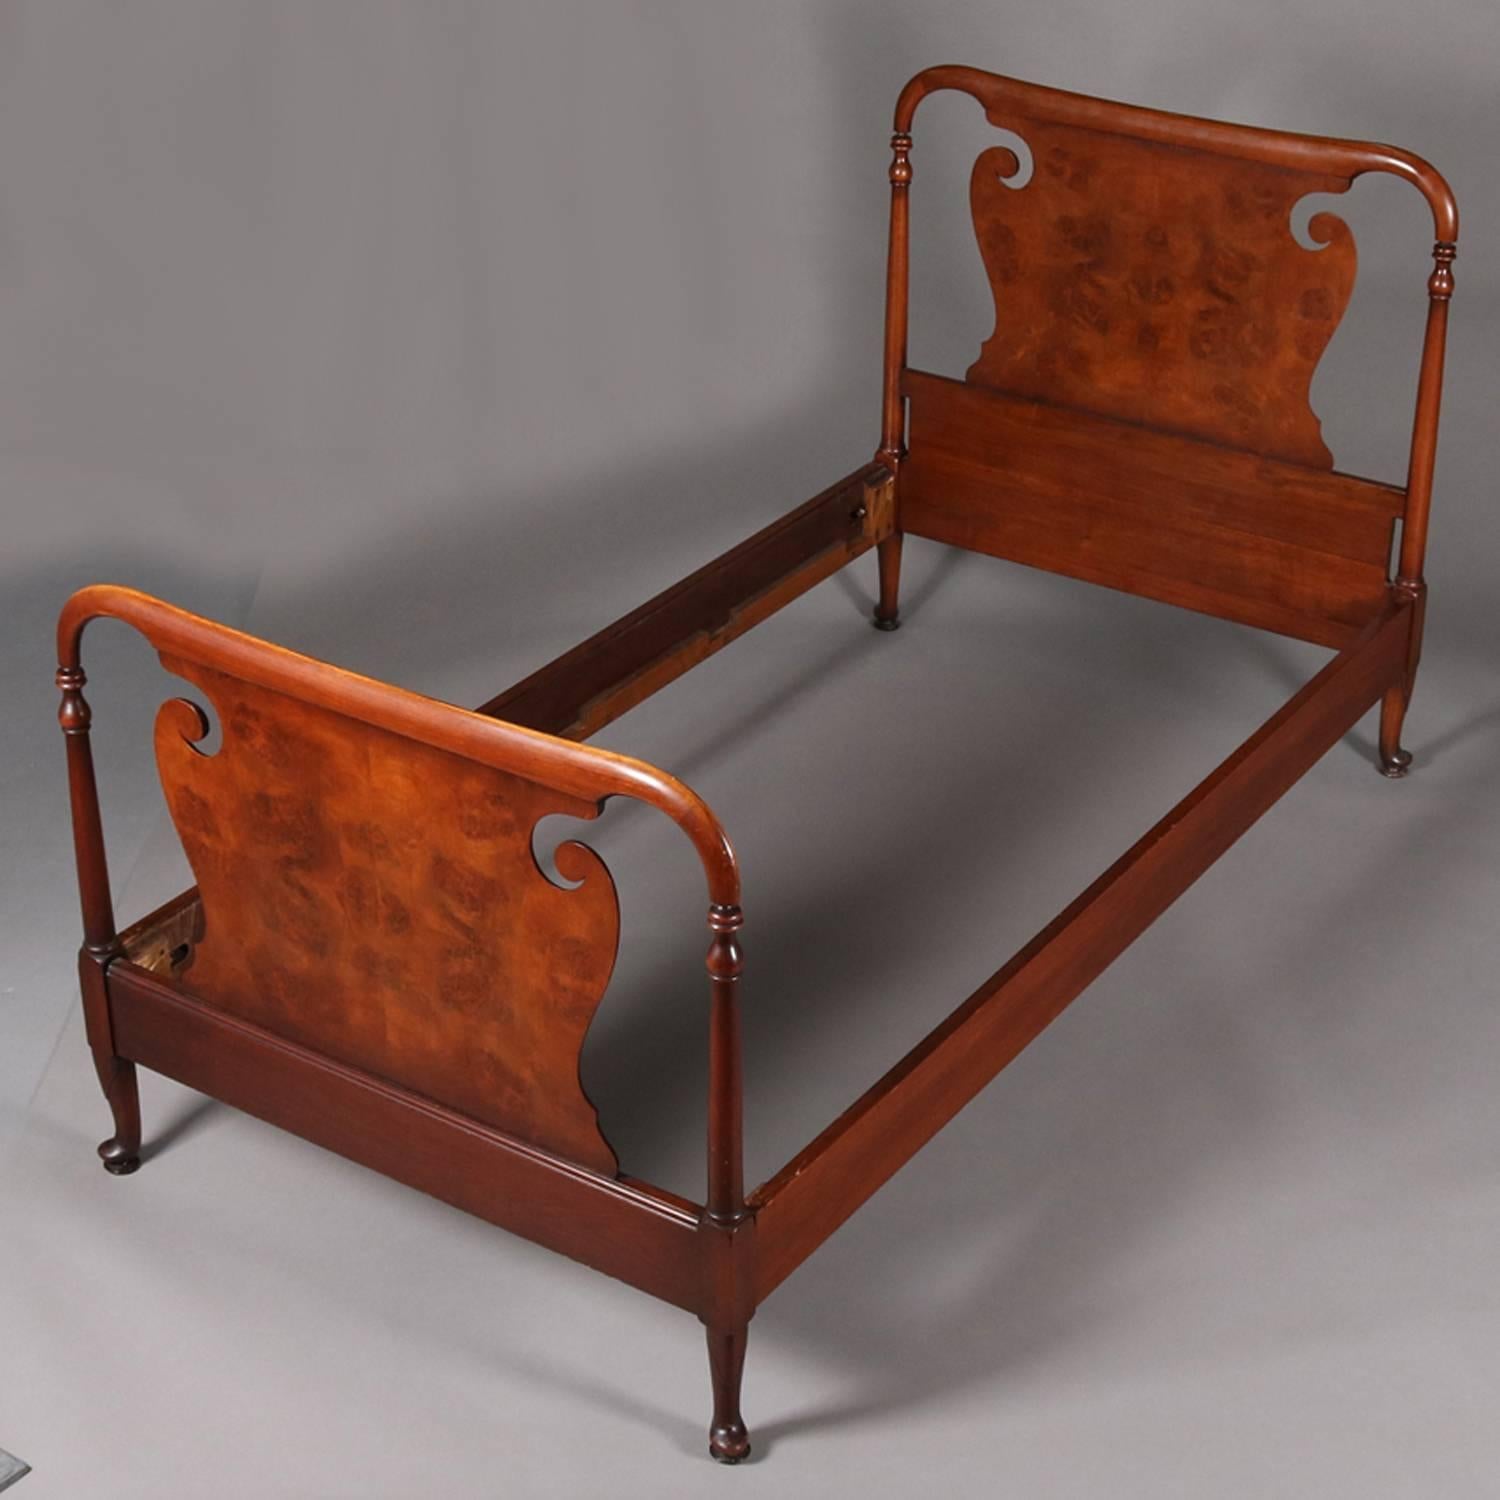 Veneer Pair of Berkey and Gay School Cut-Out and Book Matched Mahogany Twin Bed Frames